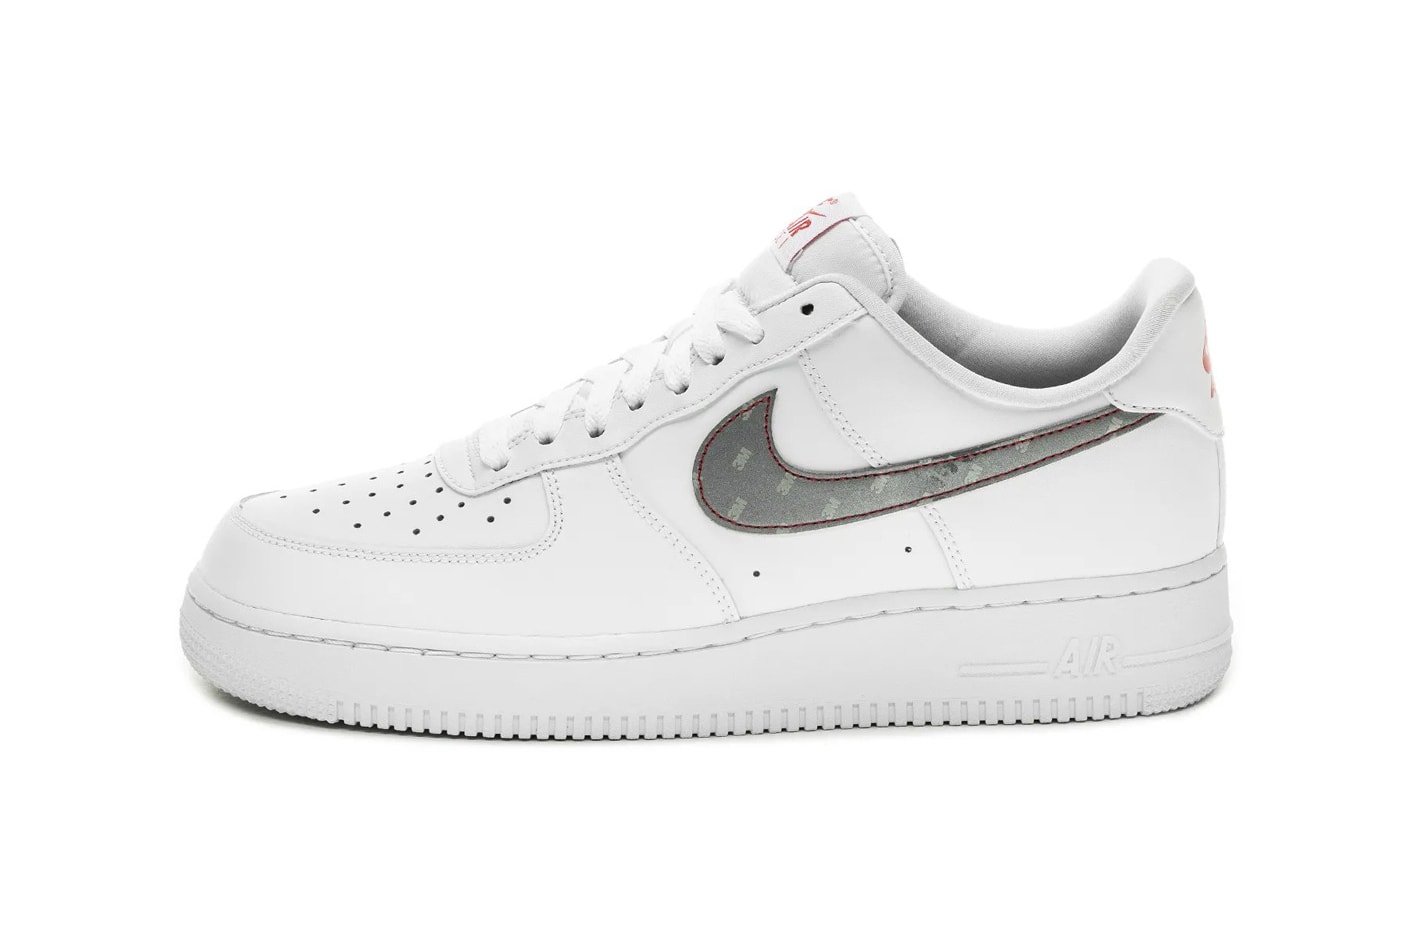 Nike Air Force 1 3M Reflective Silver White